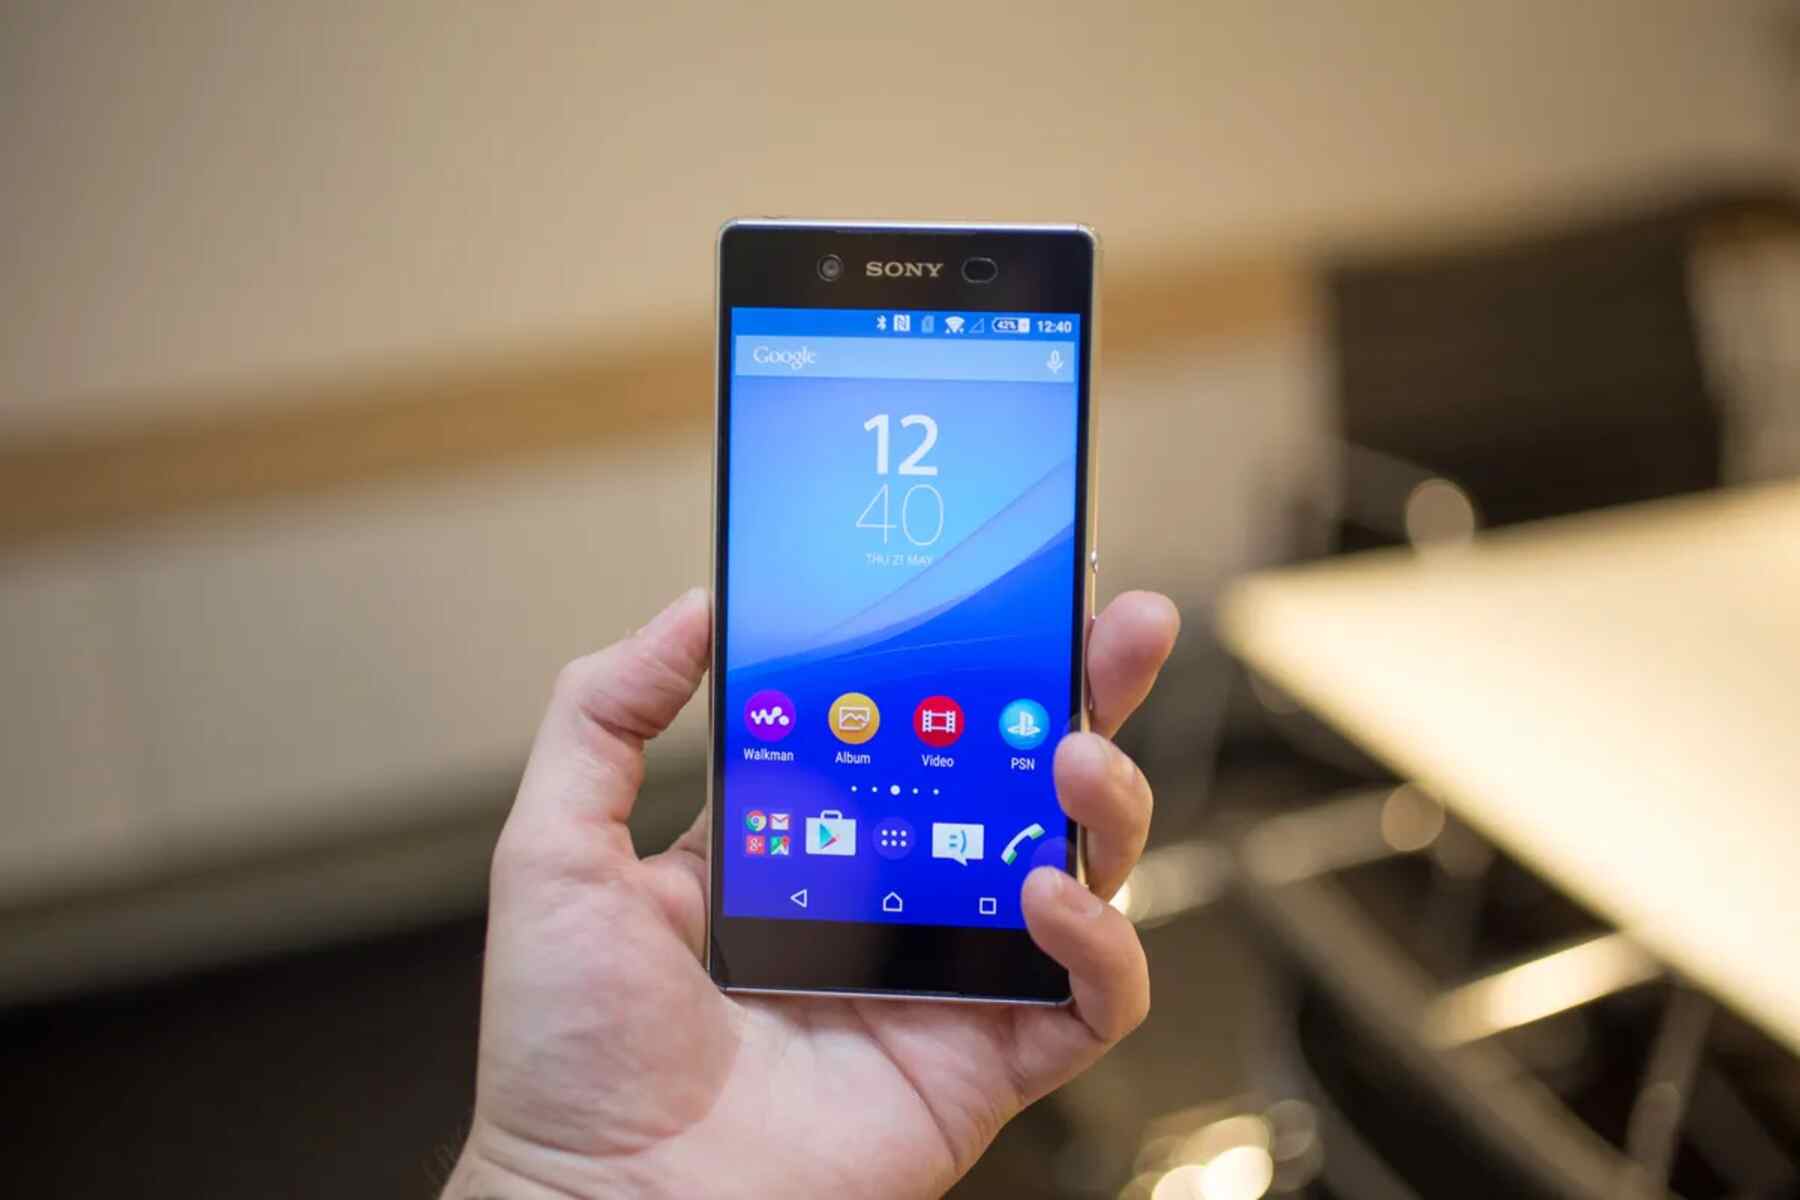 Power Button Alternatives: Turning On Xperia Z3 Without Button